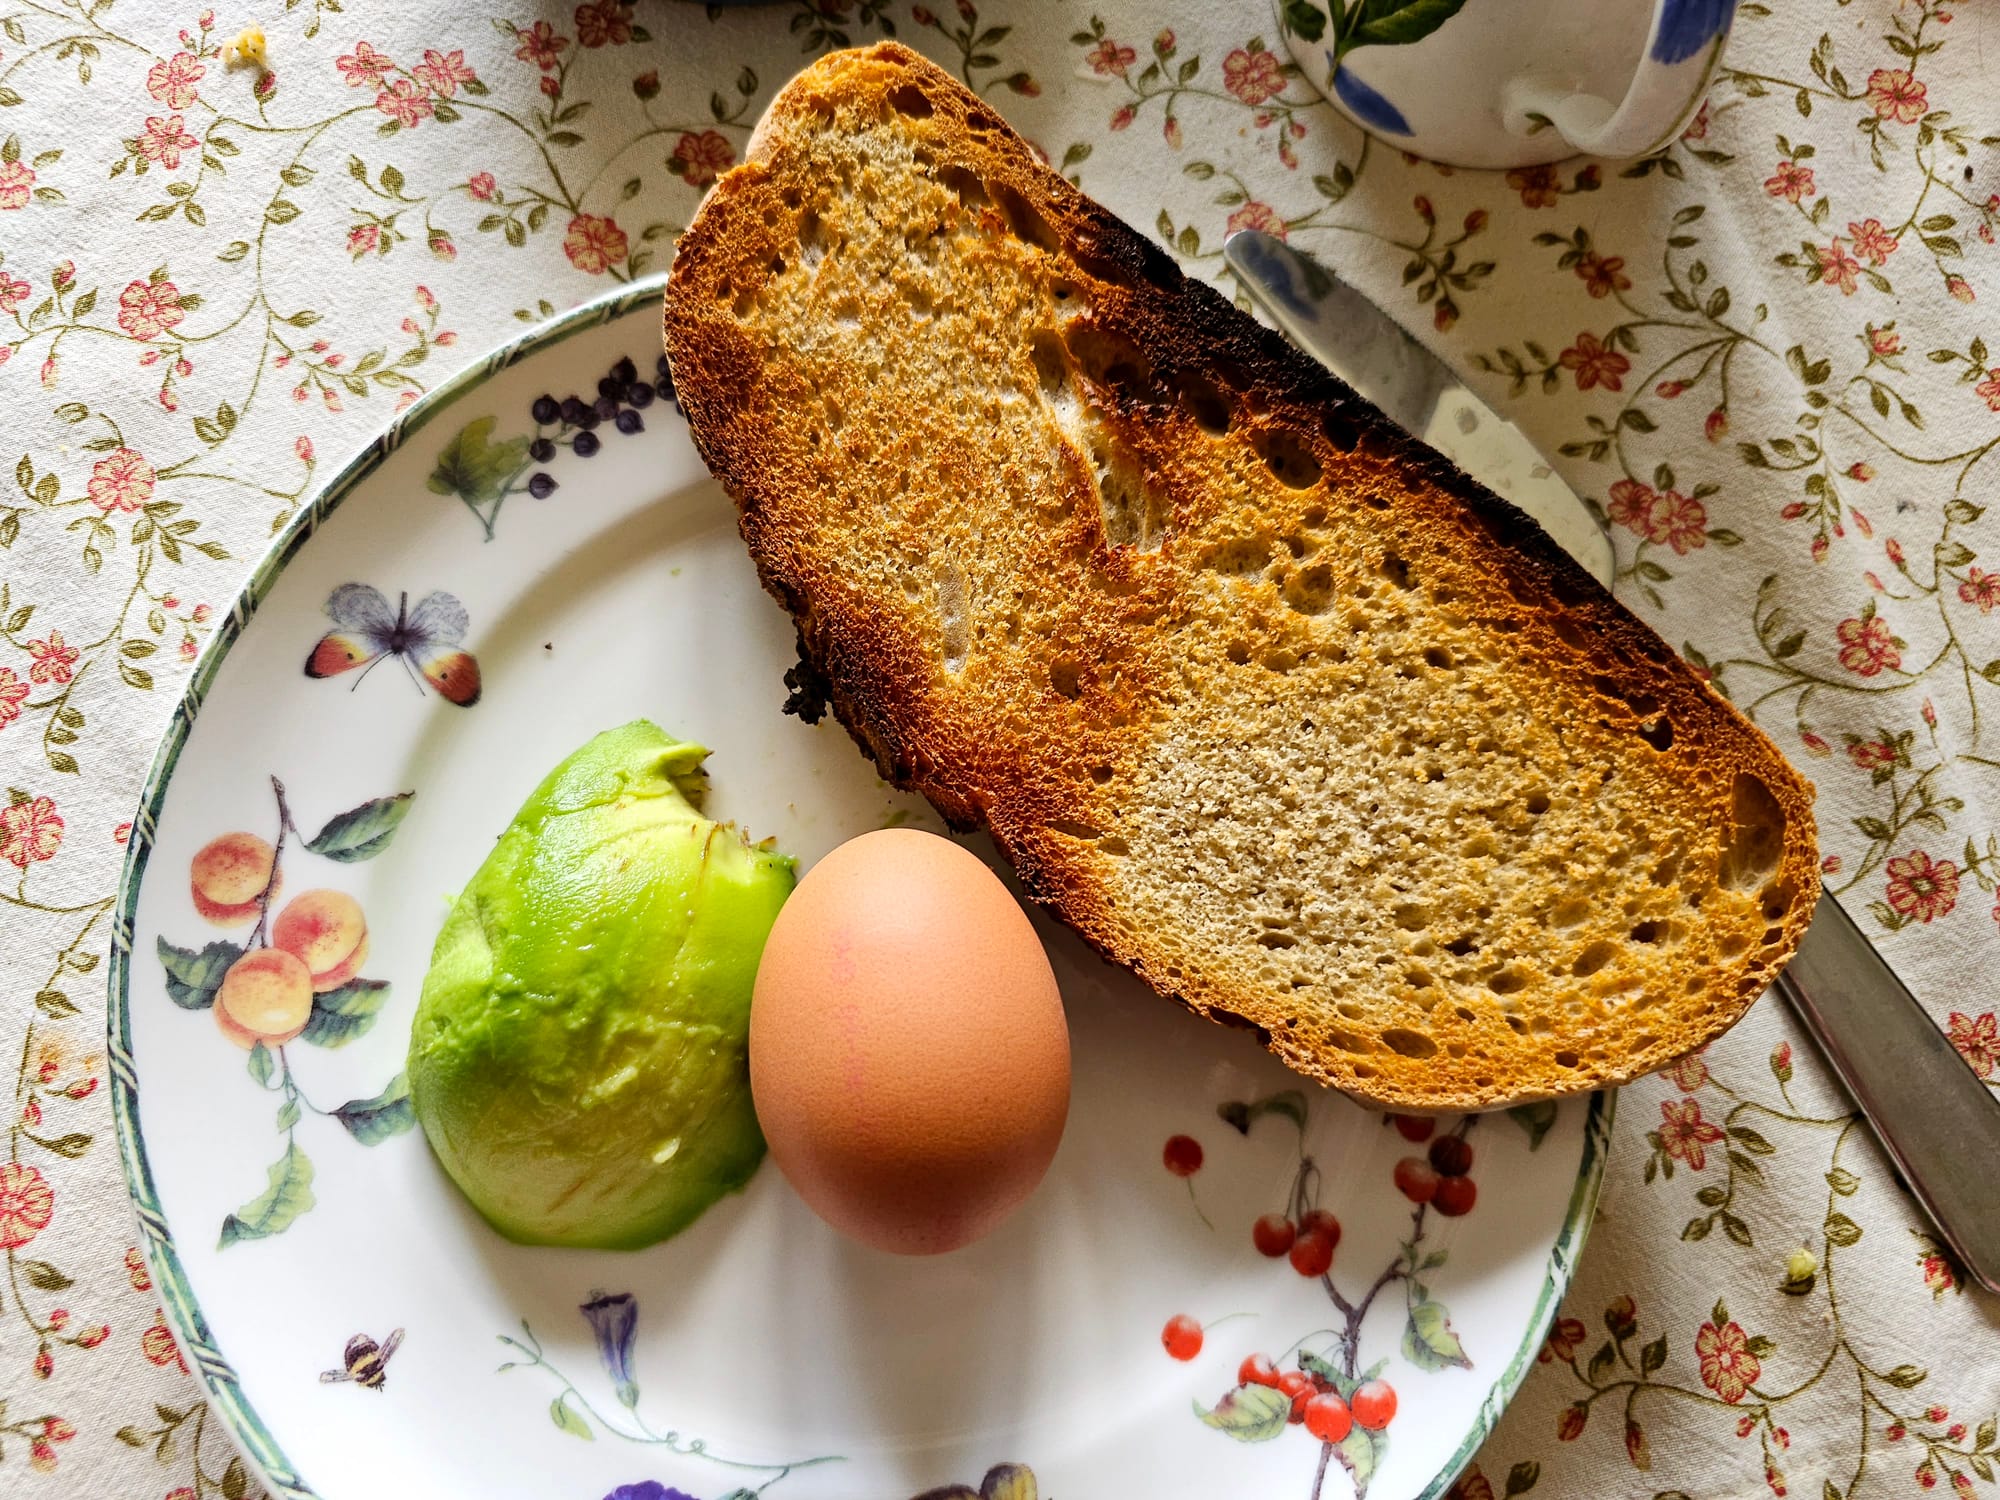 Photo of a plate with floral pattern, on which sit an egg, unpeeled, half an avocado, peeled, and a slice of toasted bread. 